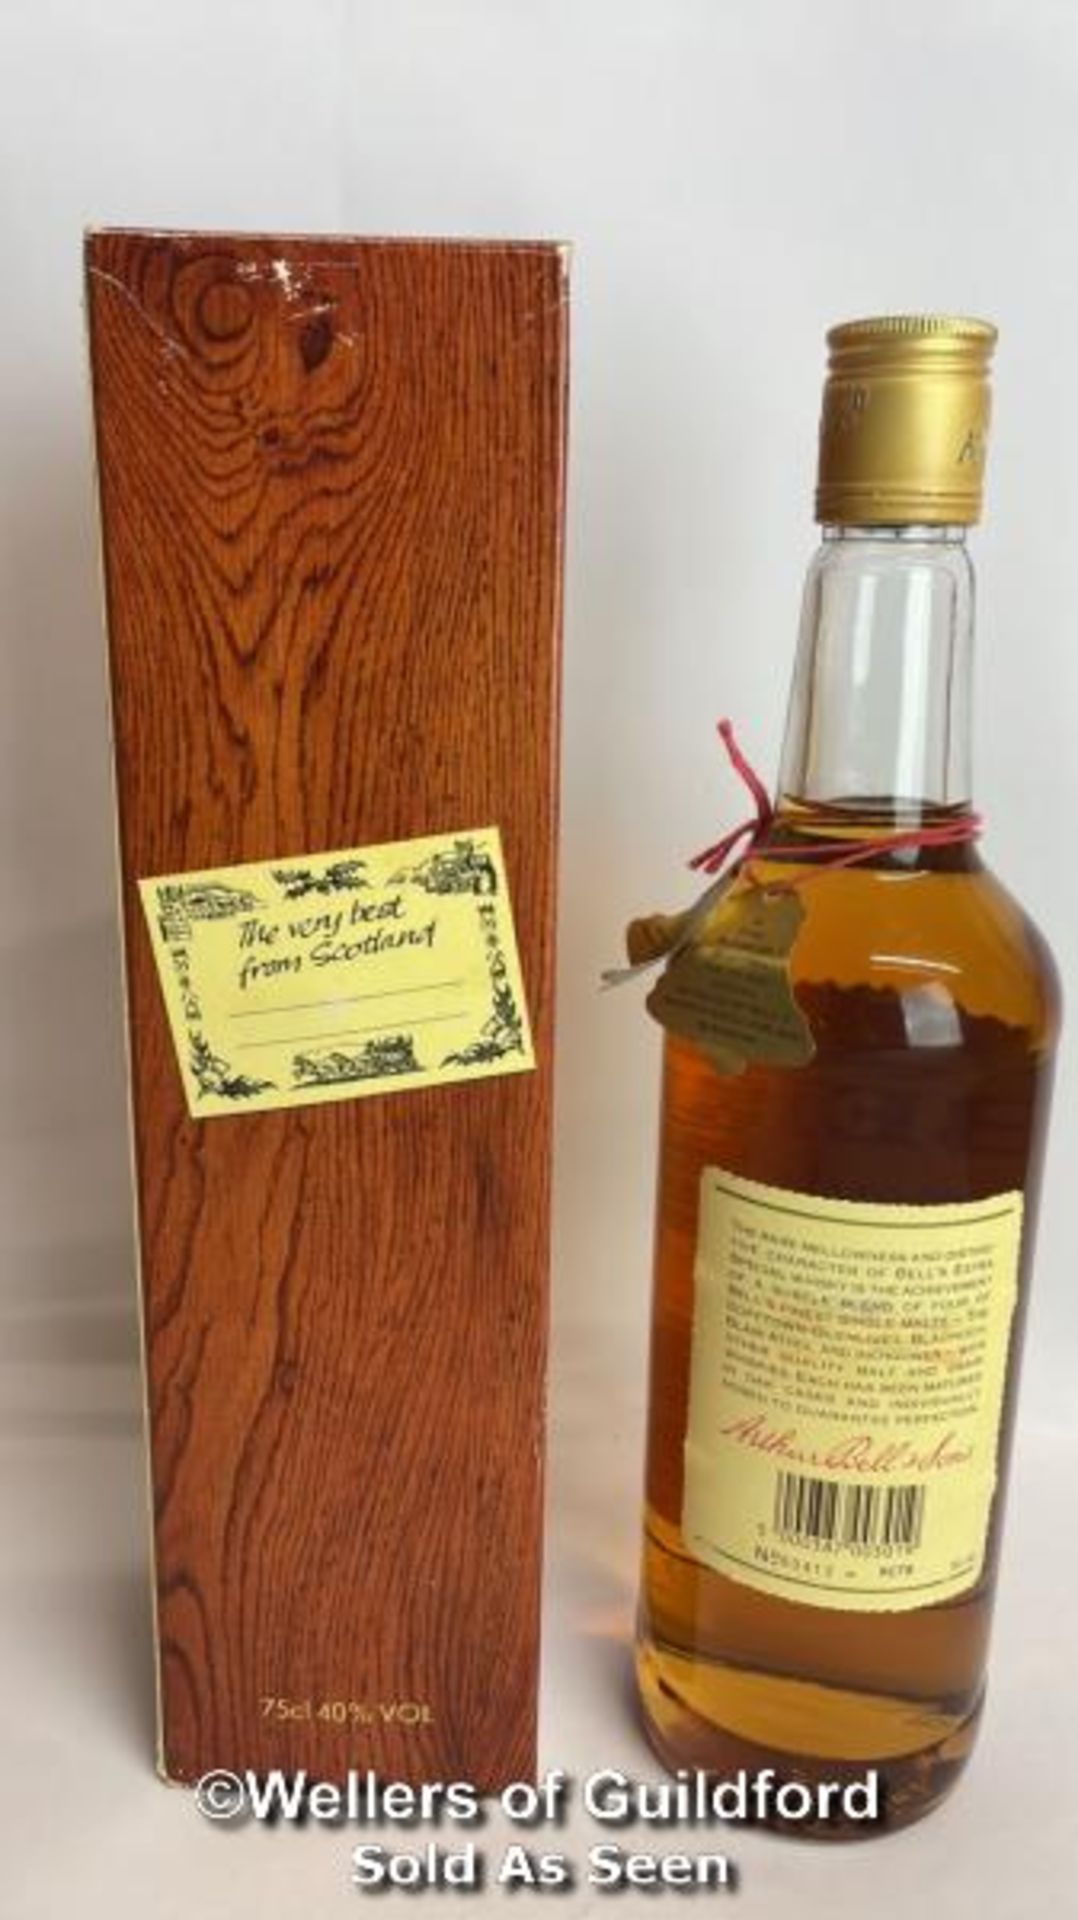 Bell's Extra Special Old Scotch Whisky, "Afore Ye Go", 75cl, 43% vol, In original box / Please see - Bild 6 aus 12